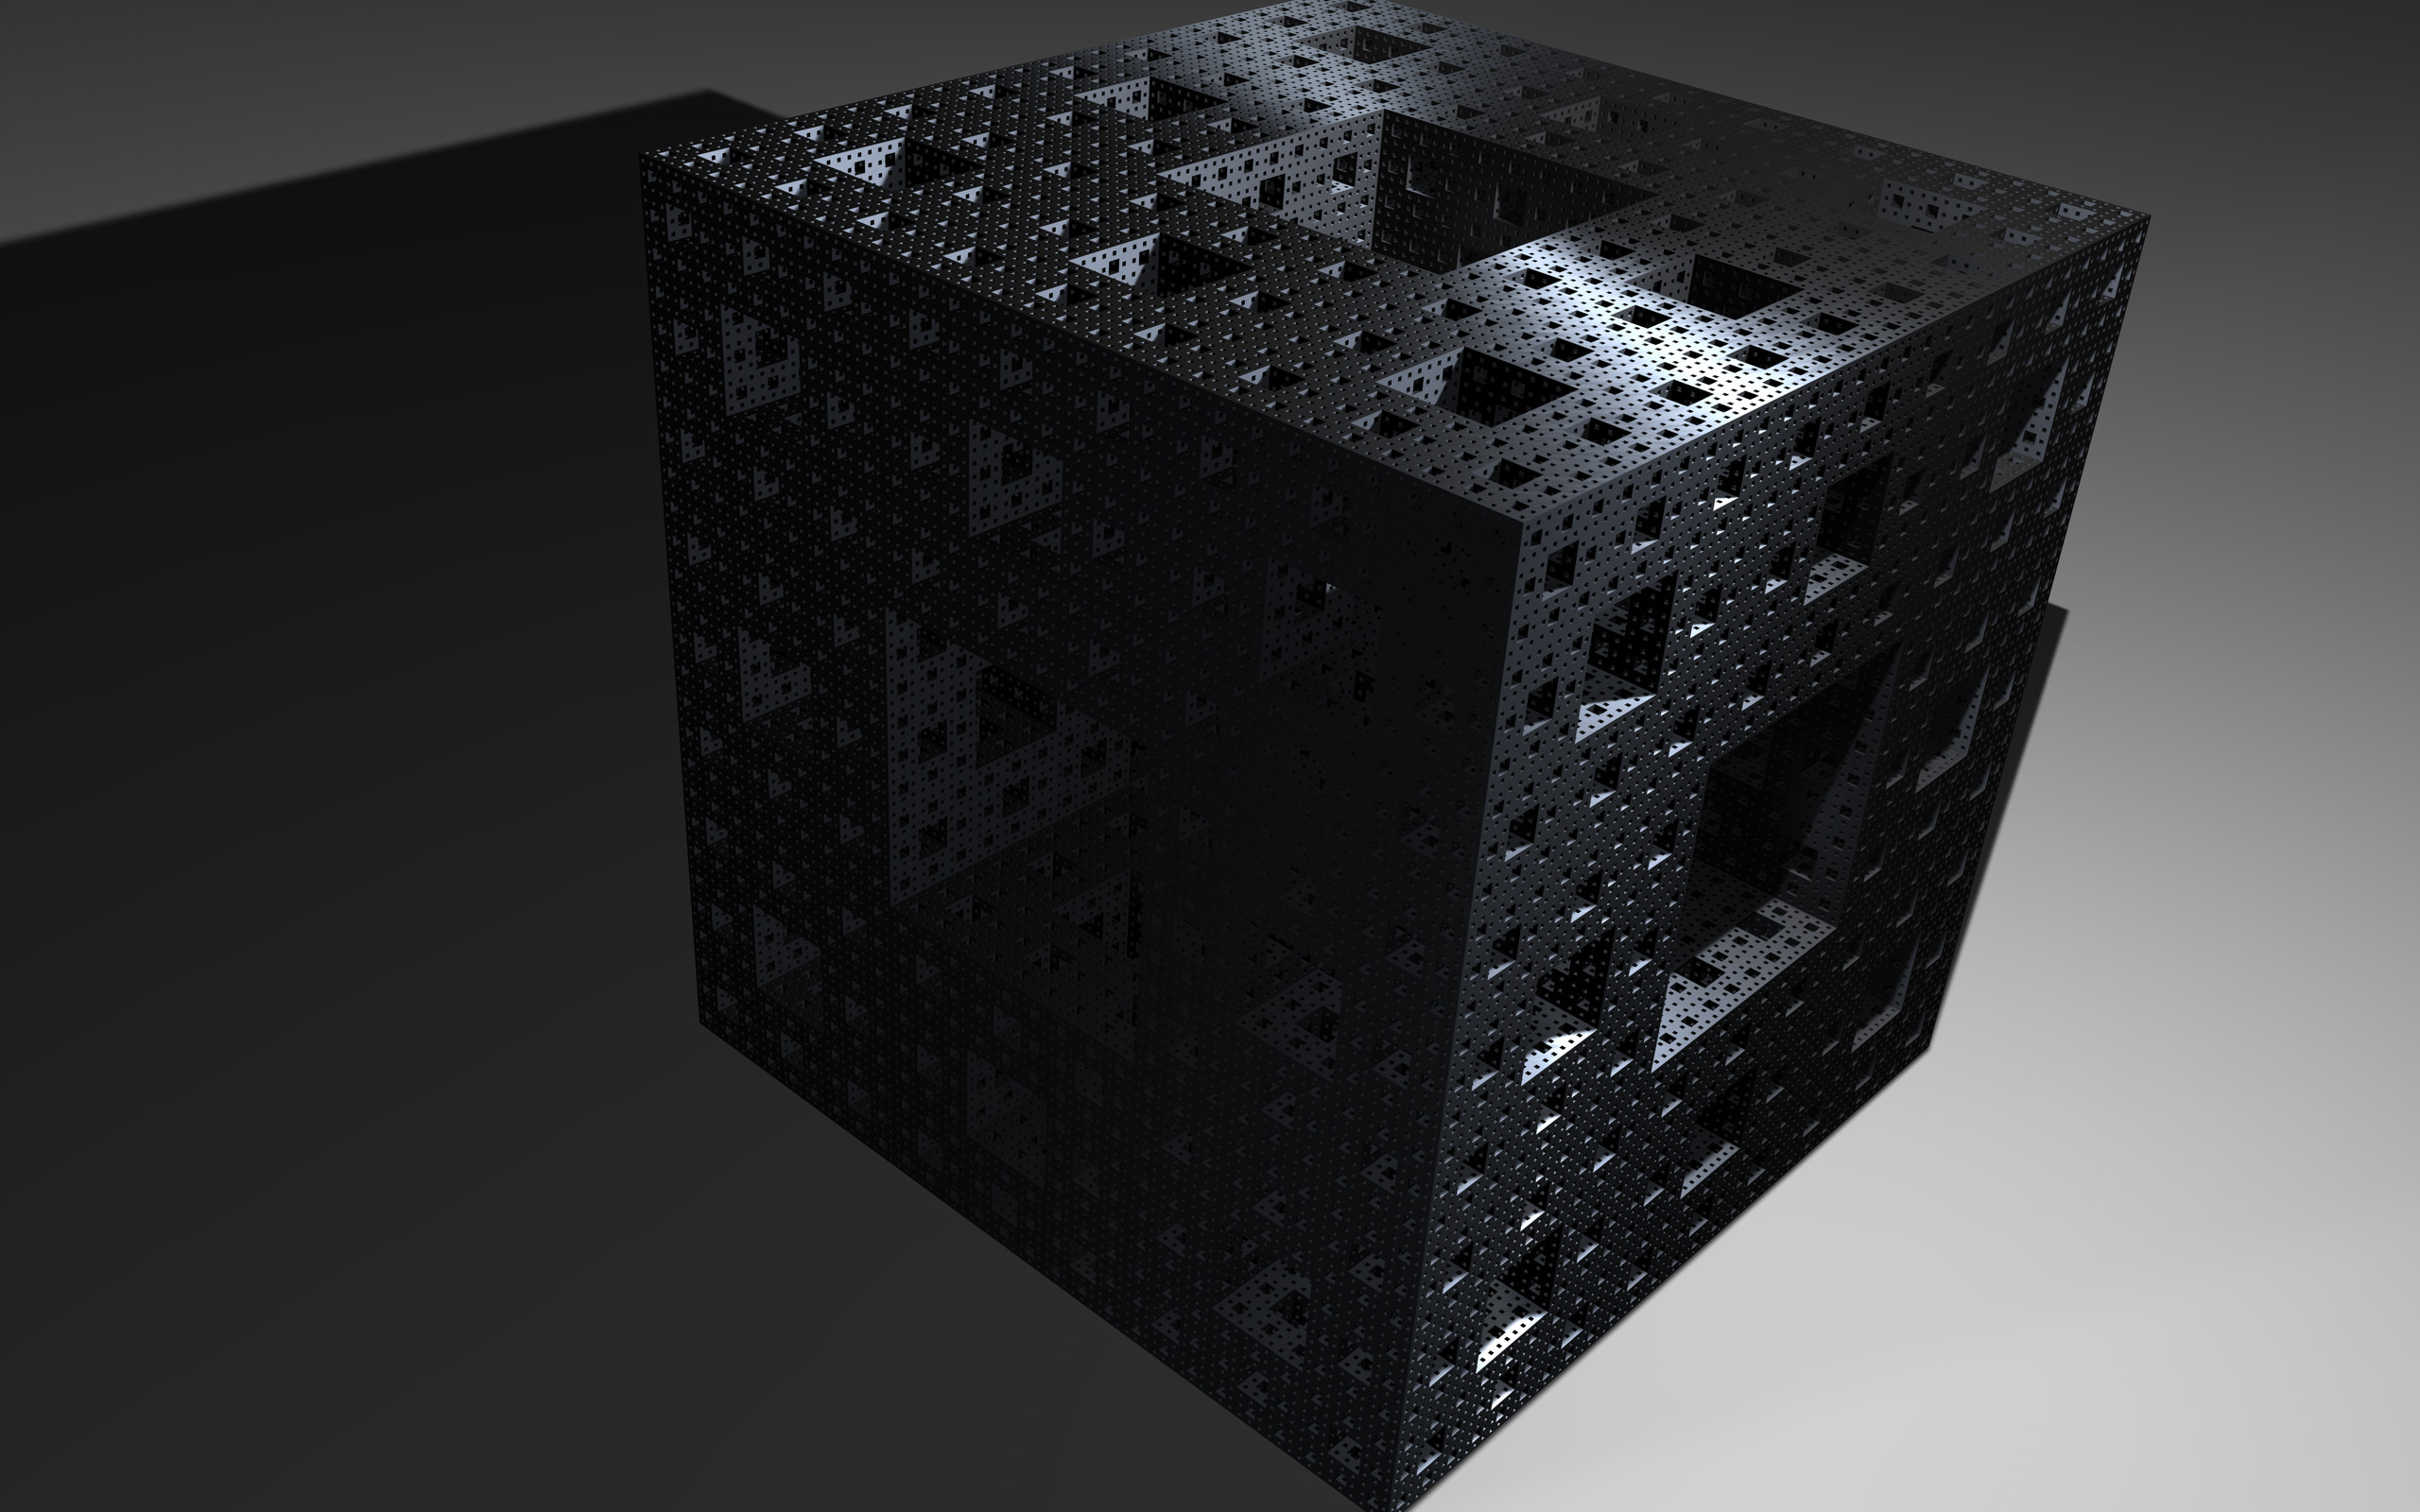 2560x1600 cool 33789 high definition 3d wallpapers for desktop high definition 3d  wallpapers for desktop fractal cube